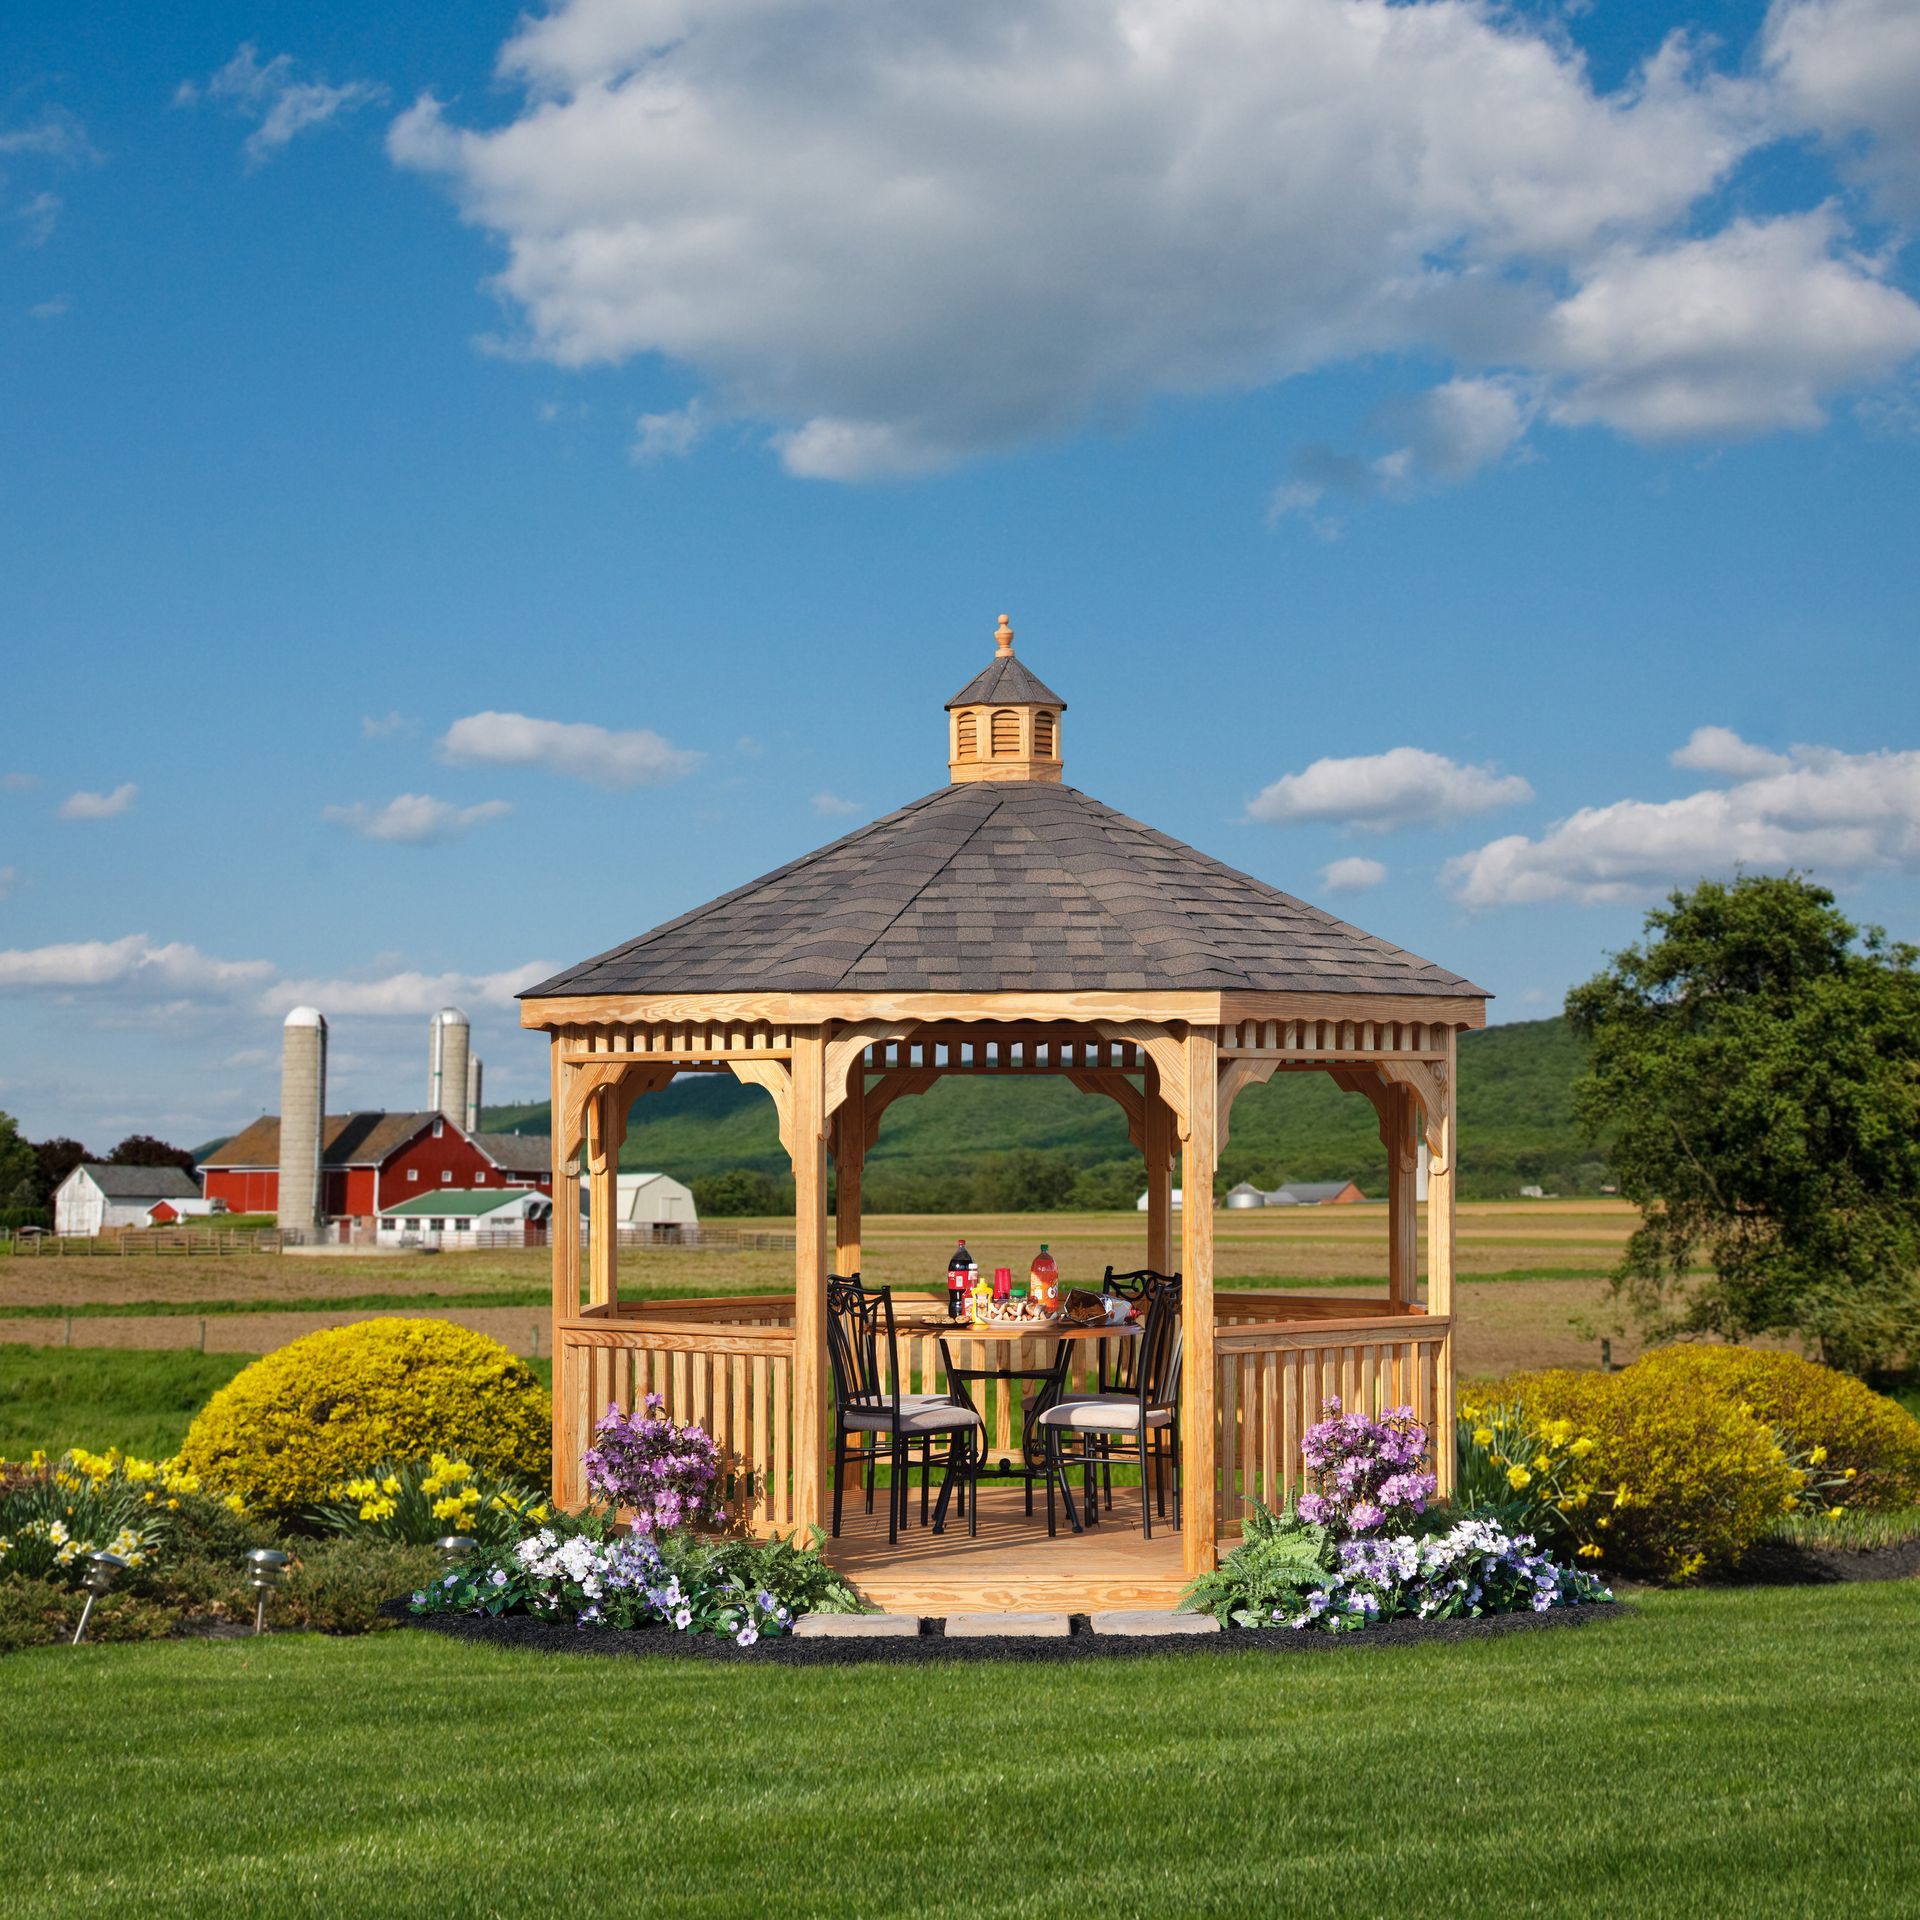 a gazebo with a table and chairs in the middle of a grassy field